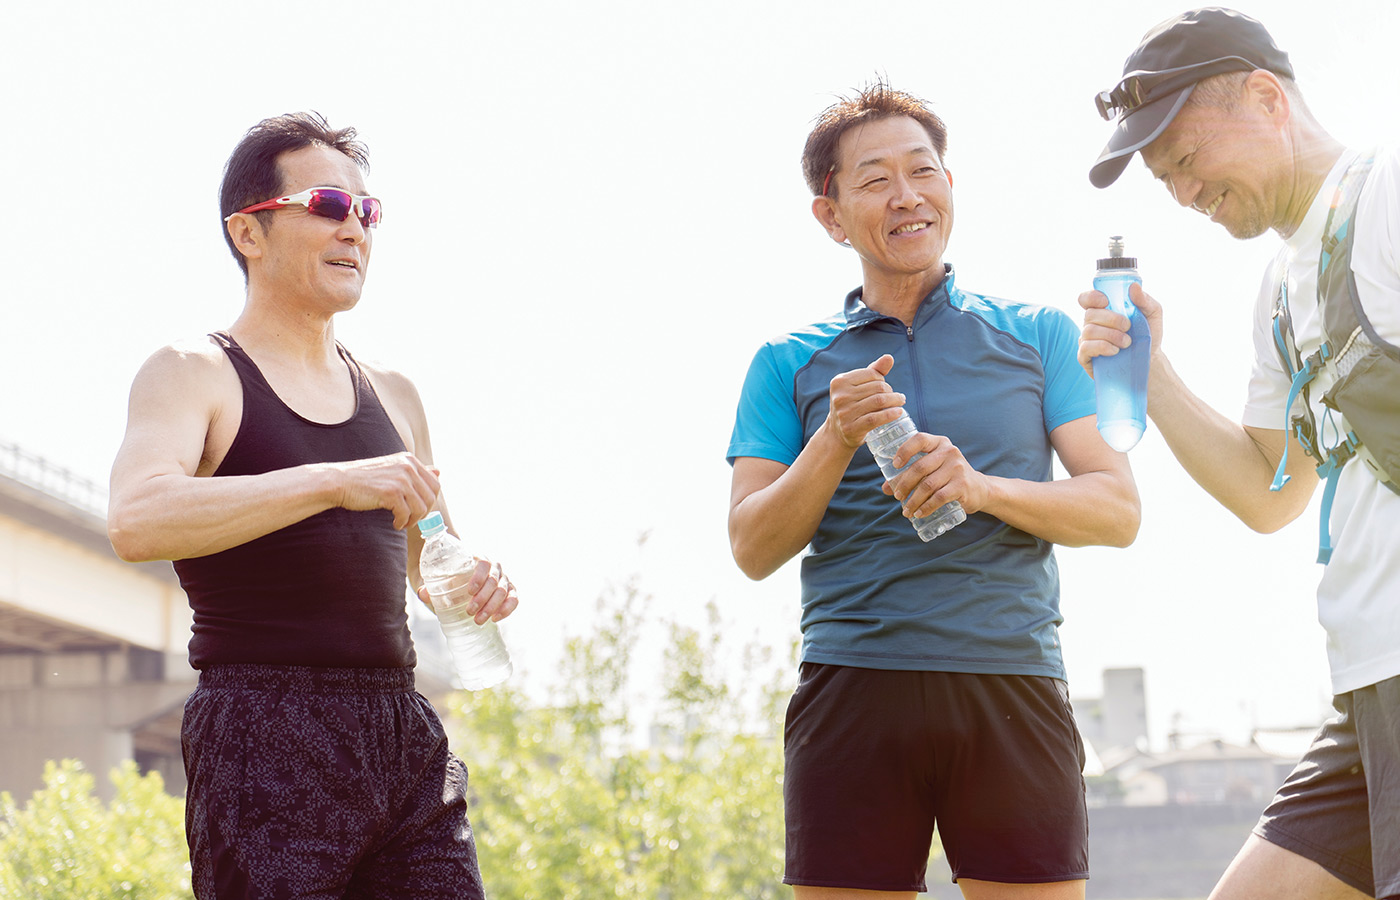 Three people in workout attire chatting outside.